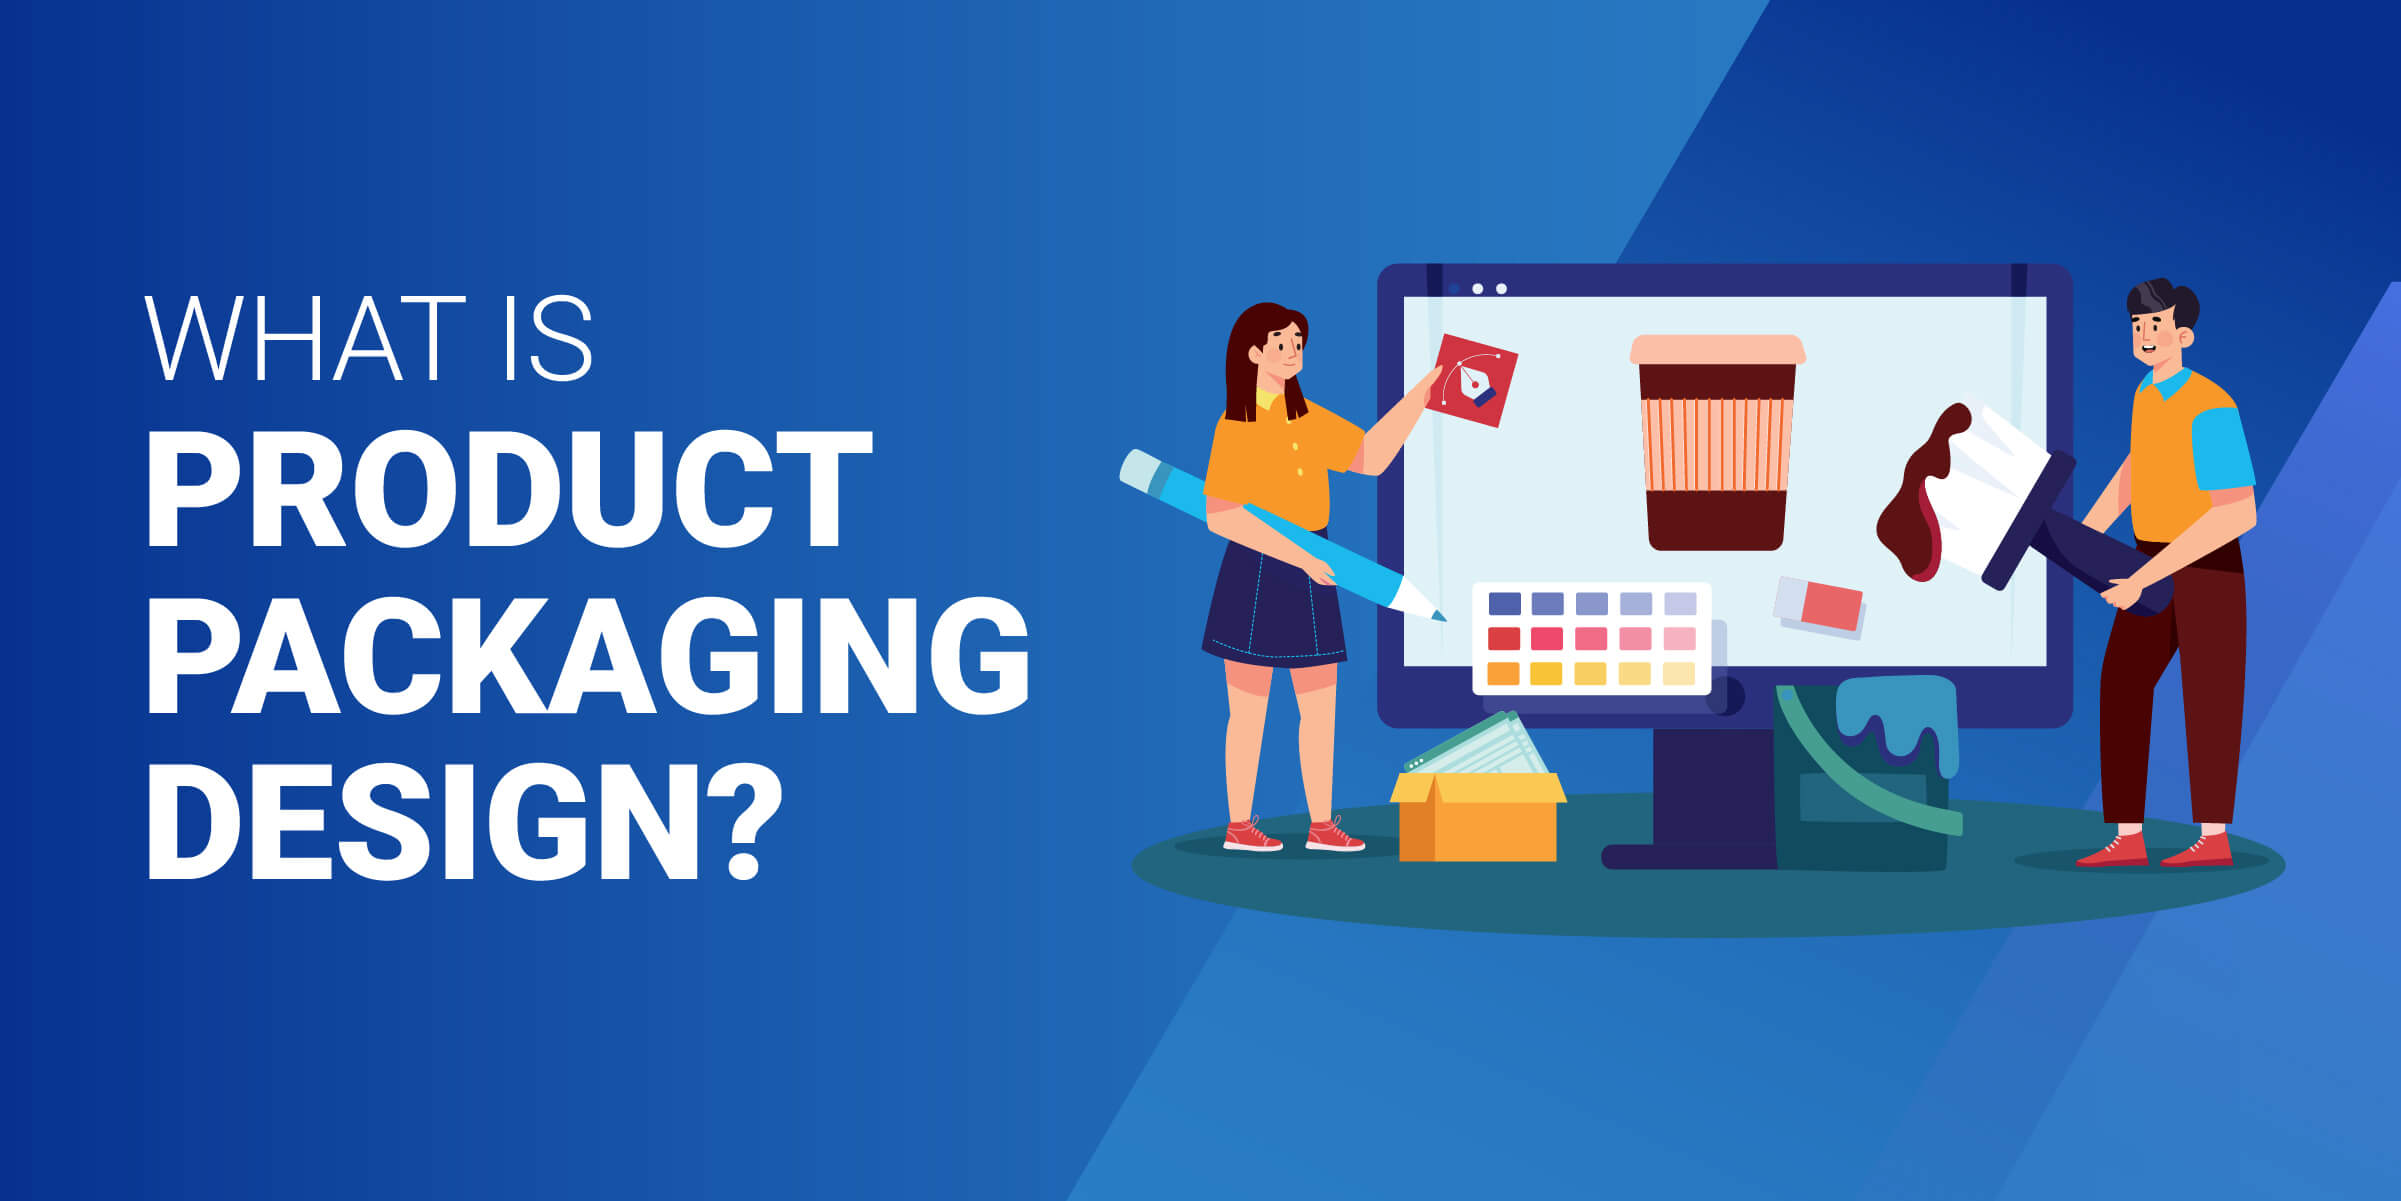 What Is Product Packaging Design